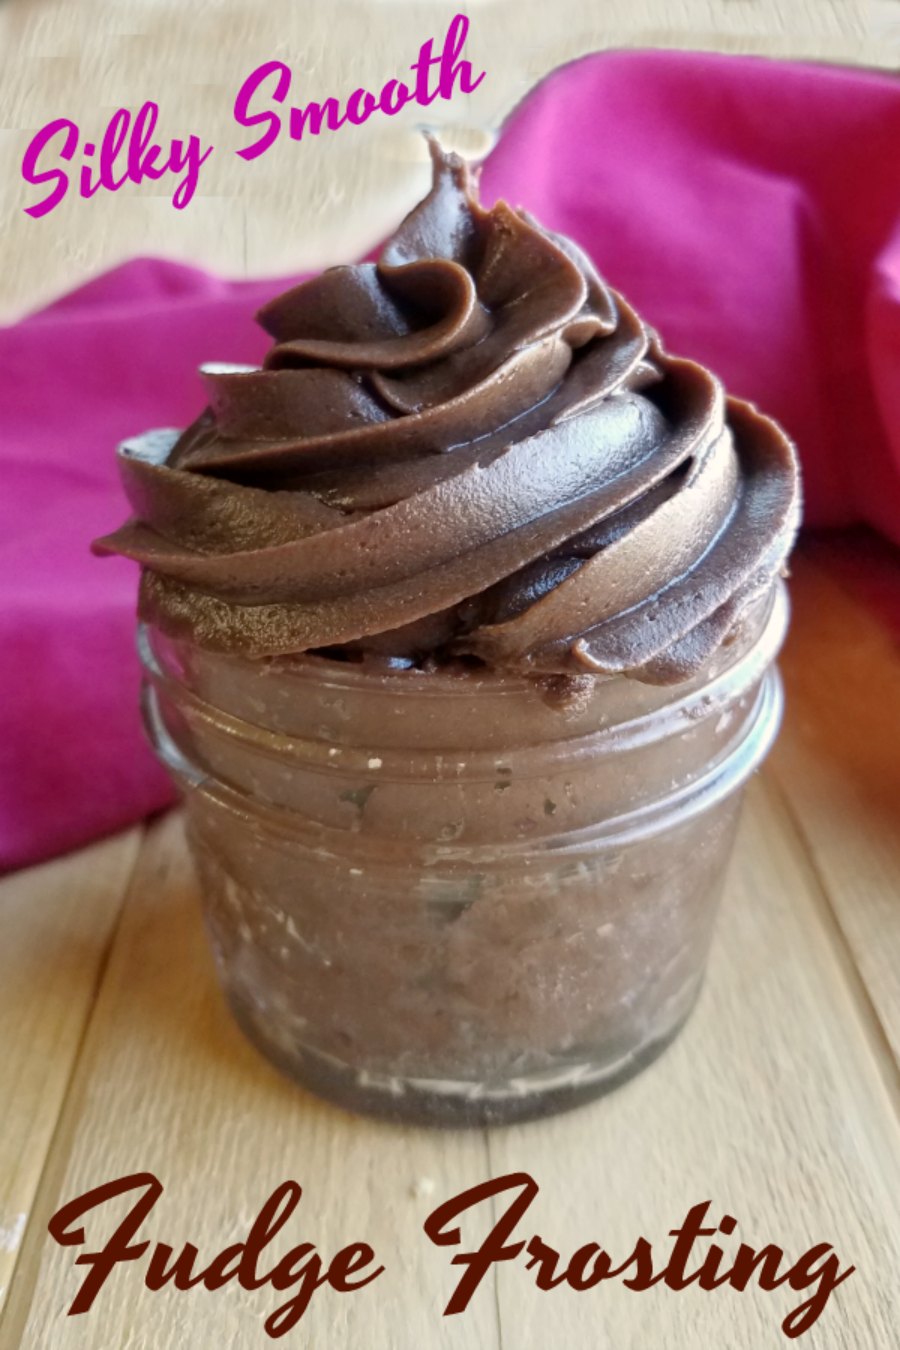 Silky smooth and super chocolaty, this fudge frosting is perfect for piping out designs on cakes and cupcakes. Of course is spreads like a dream too, make a batch and see for yourself!